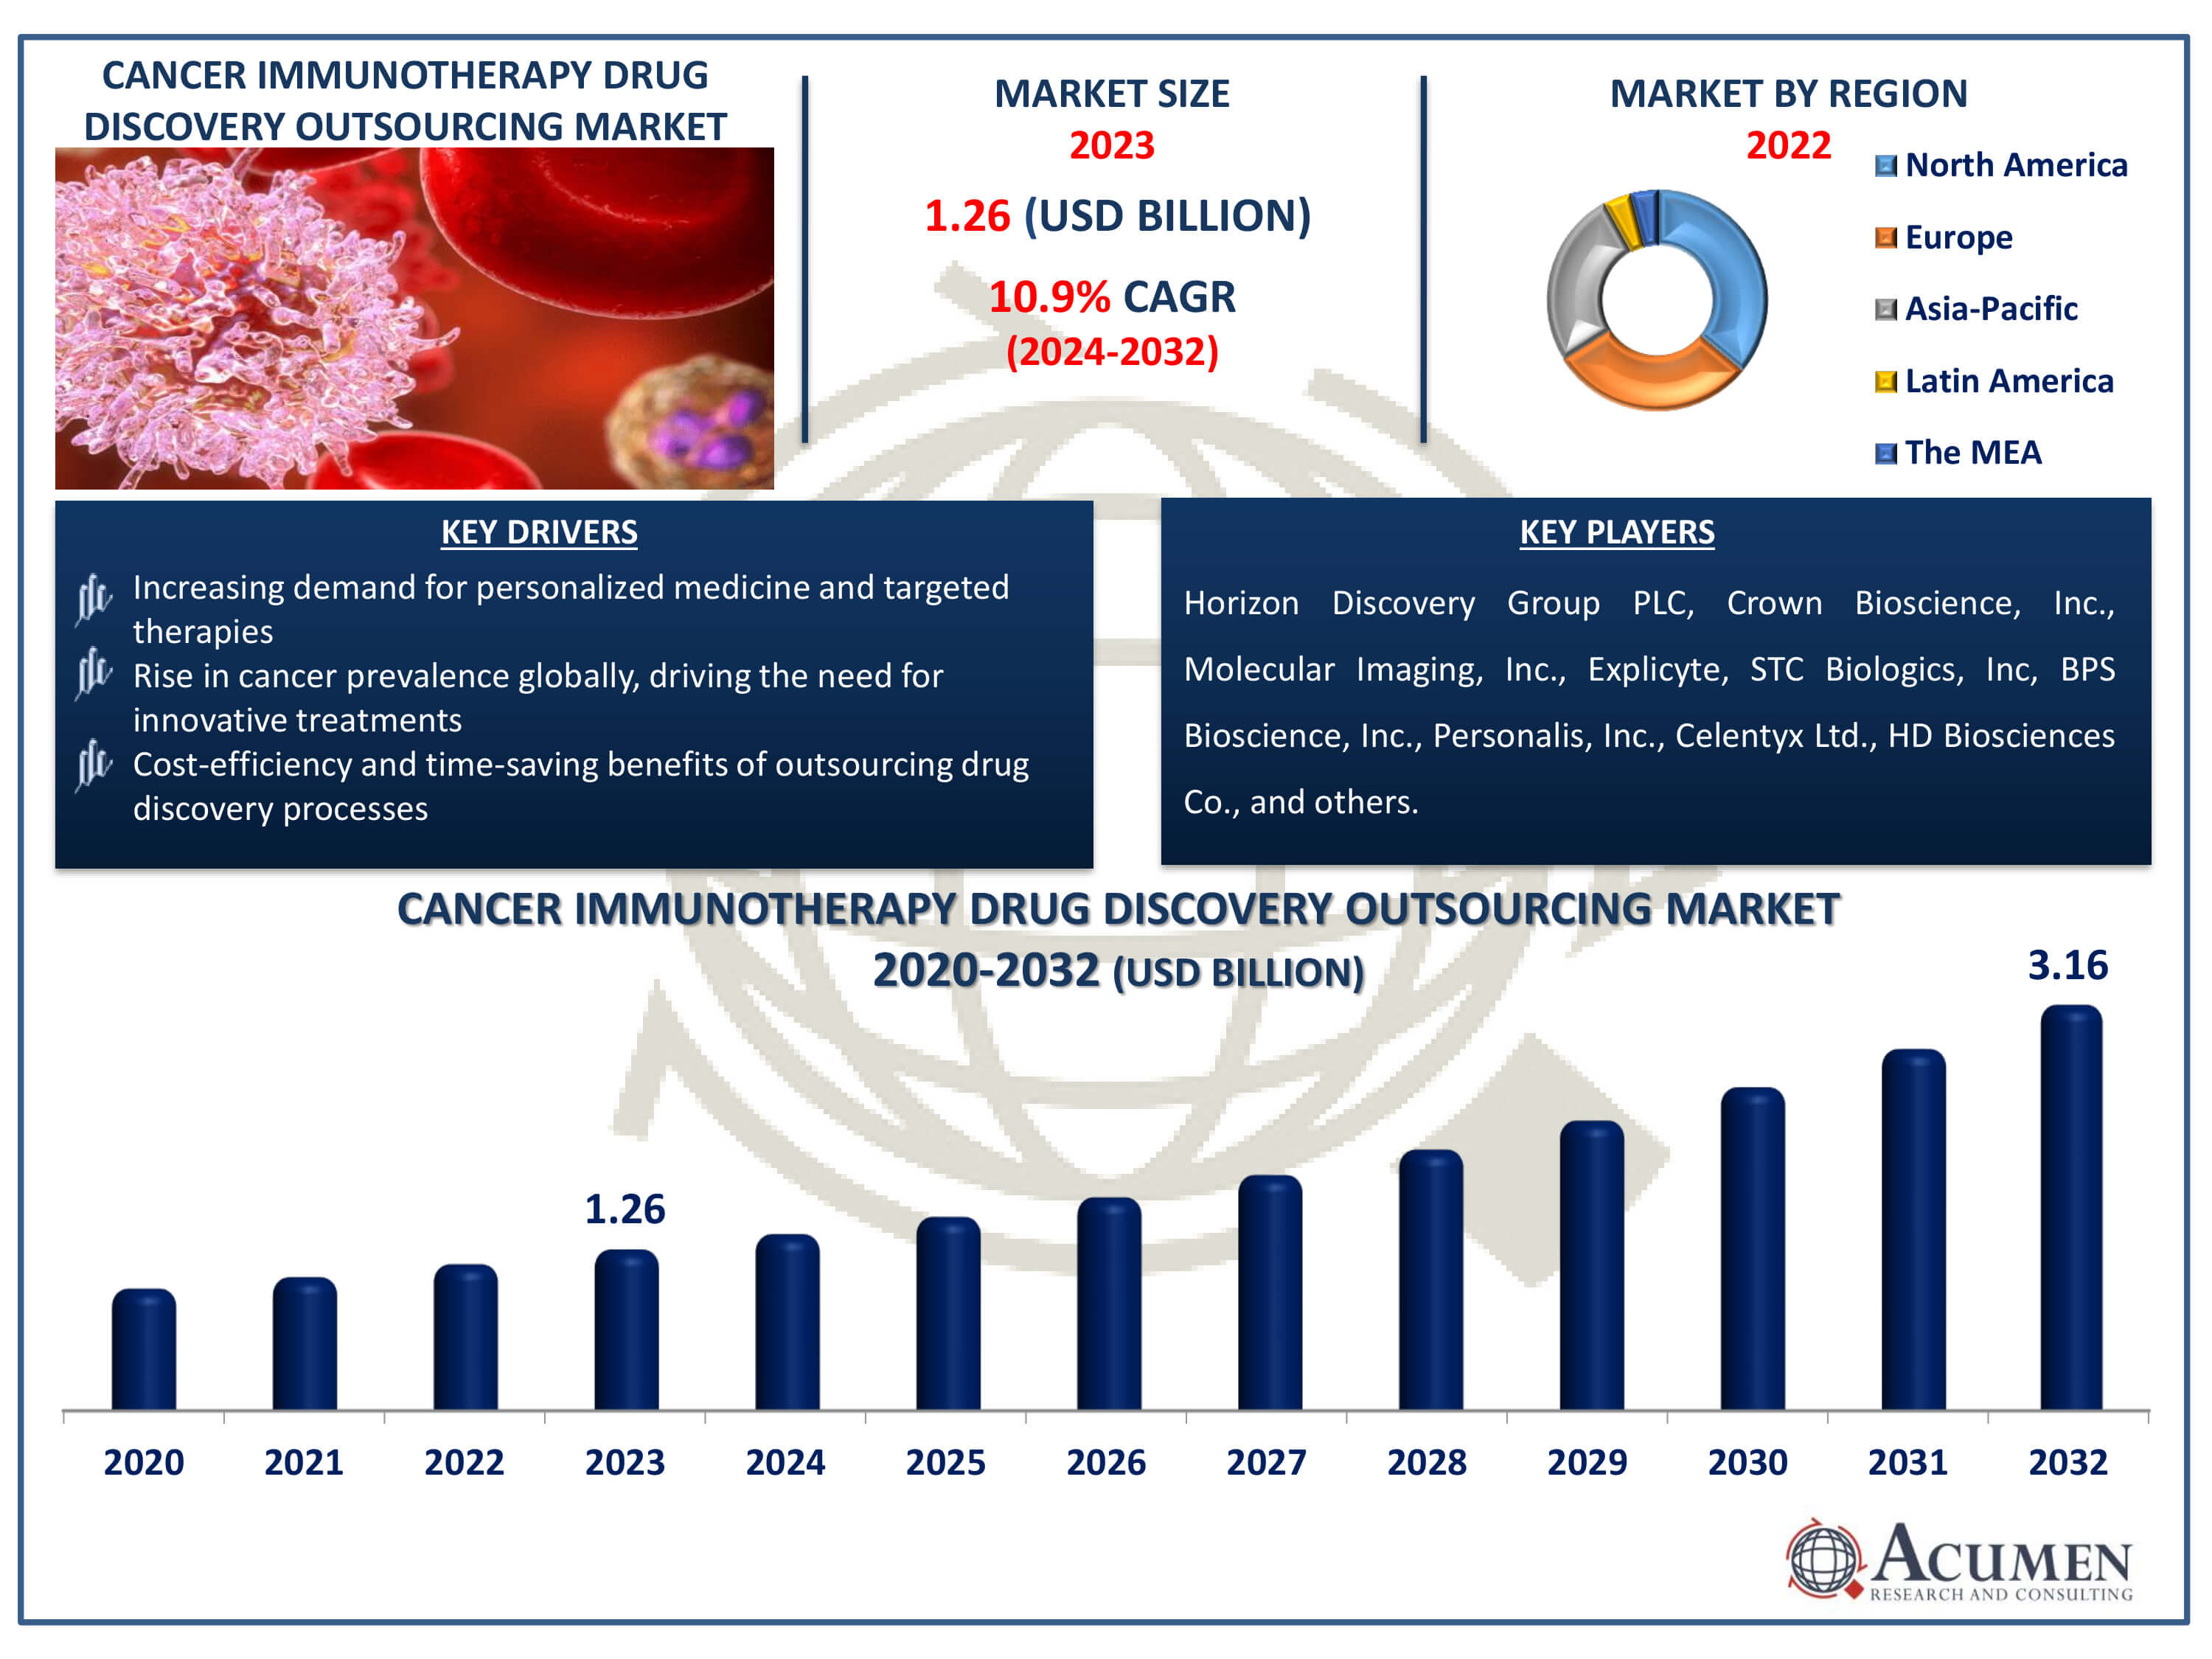 Cancer Immunotherapy Drug Discovery Outsourcing Market Dynamics